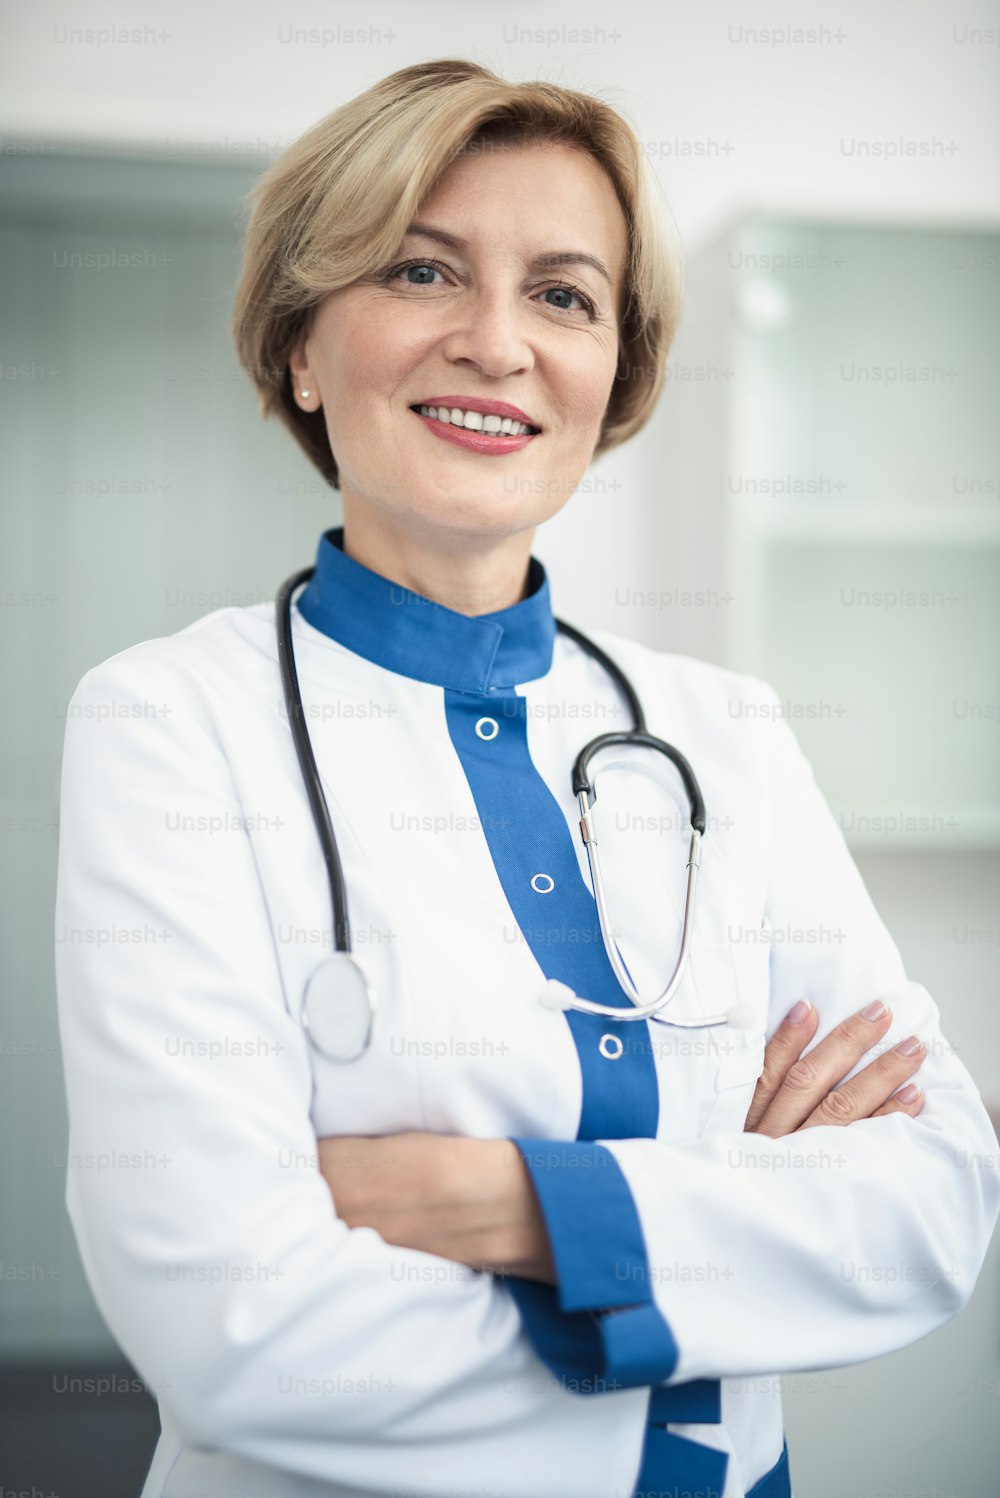 Concept of professional inspiration in healthcare system. Waist up portrait of smiling female doctor in medical uniform confidently standing in cabinet crossing her arms